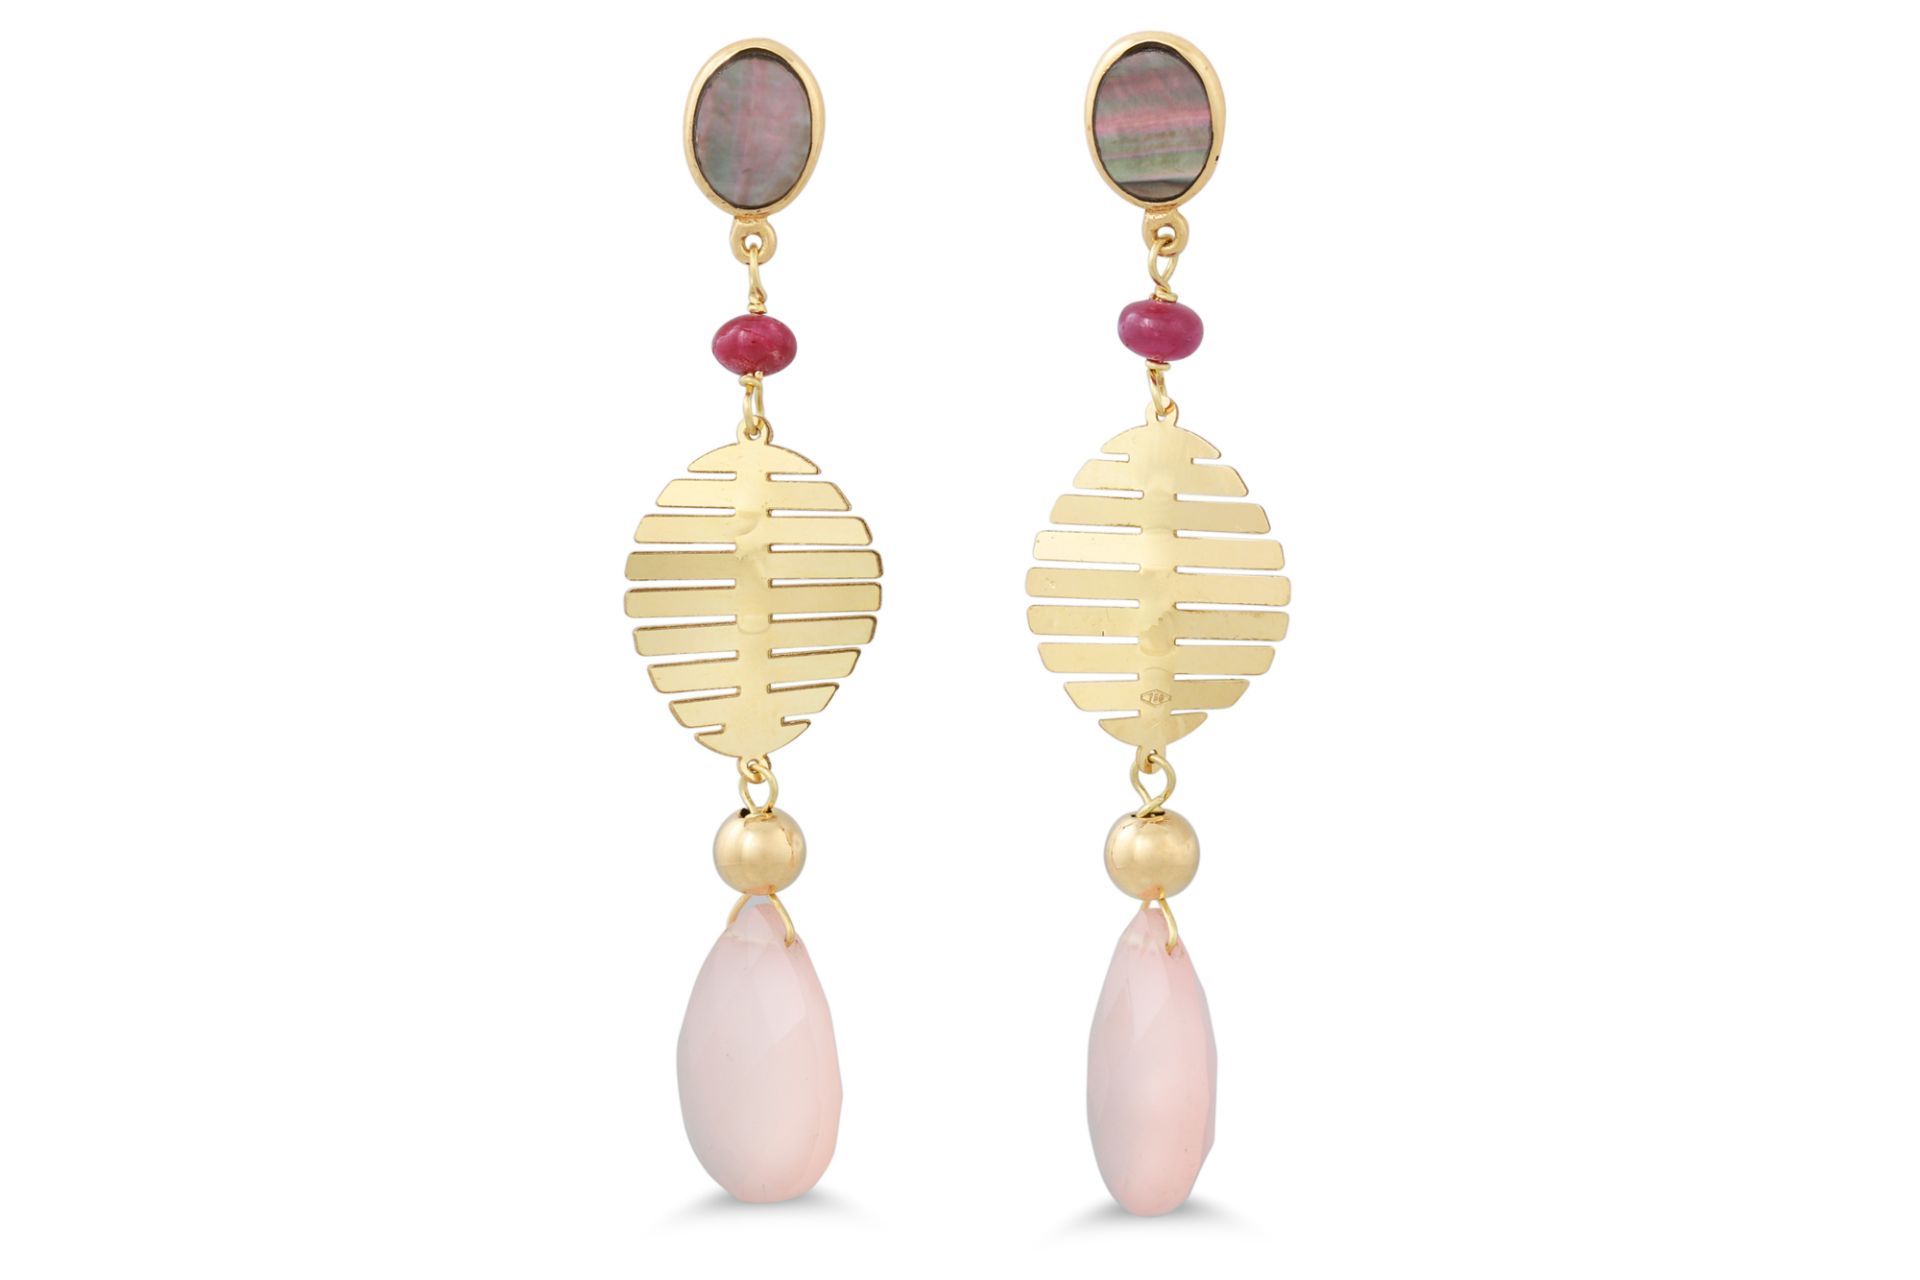 A PAIR OF PINK CHALCEDONY, RUBY AND MOTHER OF PEARL DROP EARRINGS, gold mounted